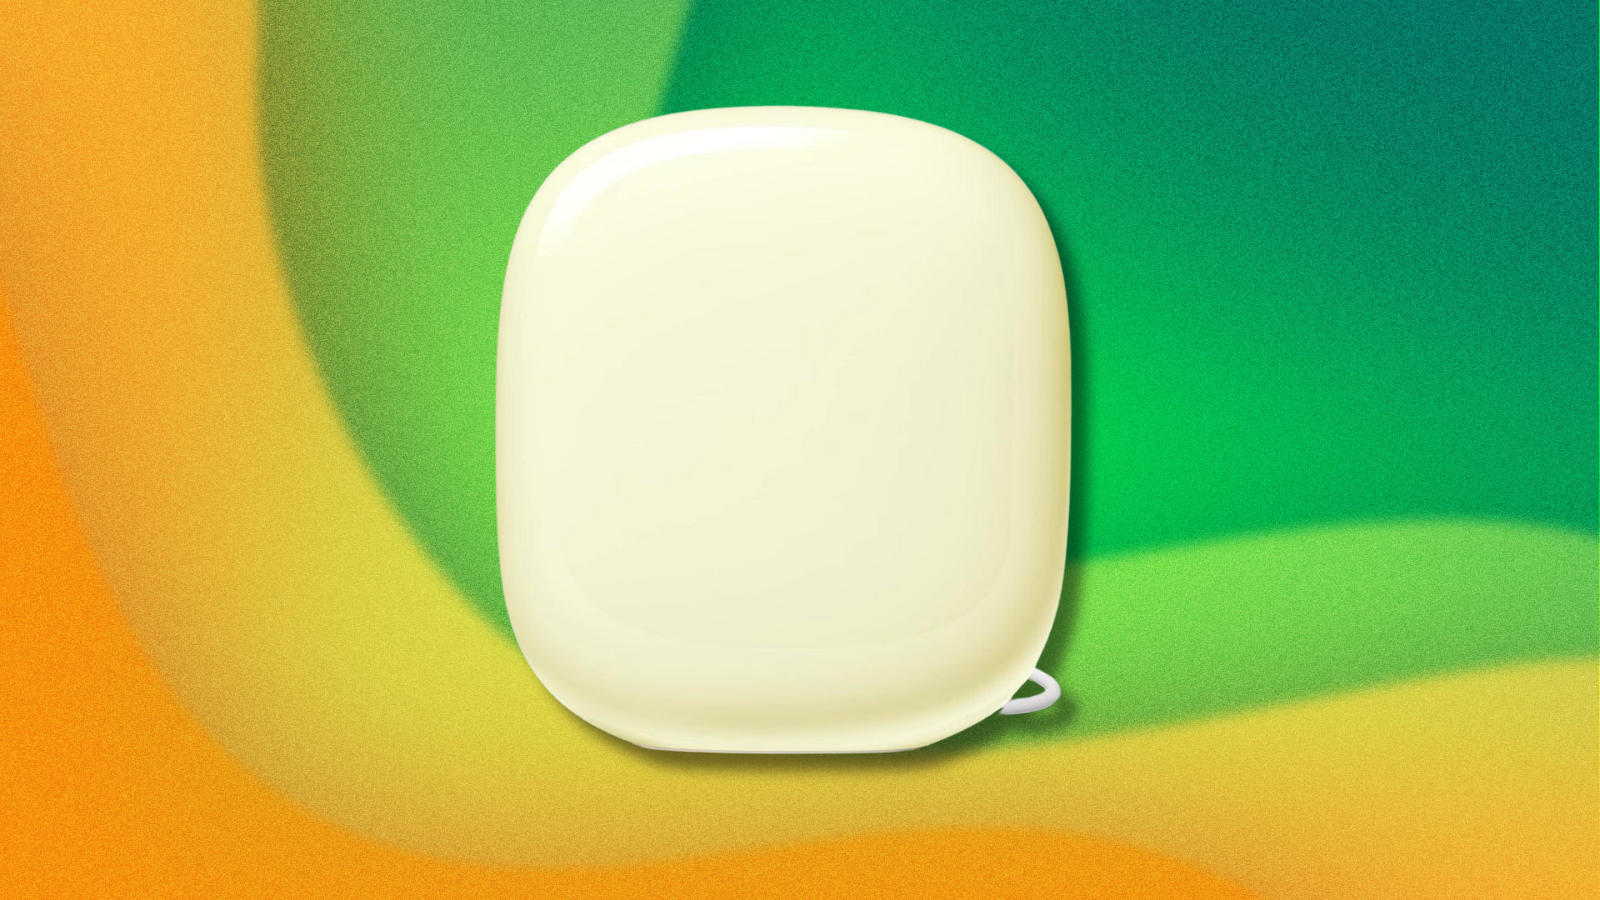 Google Nest WiFi Pro on green and yellow abstract background